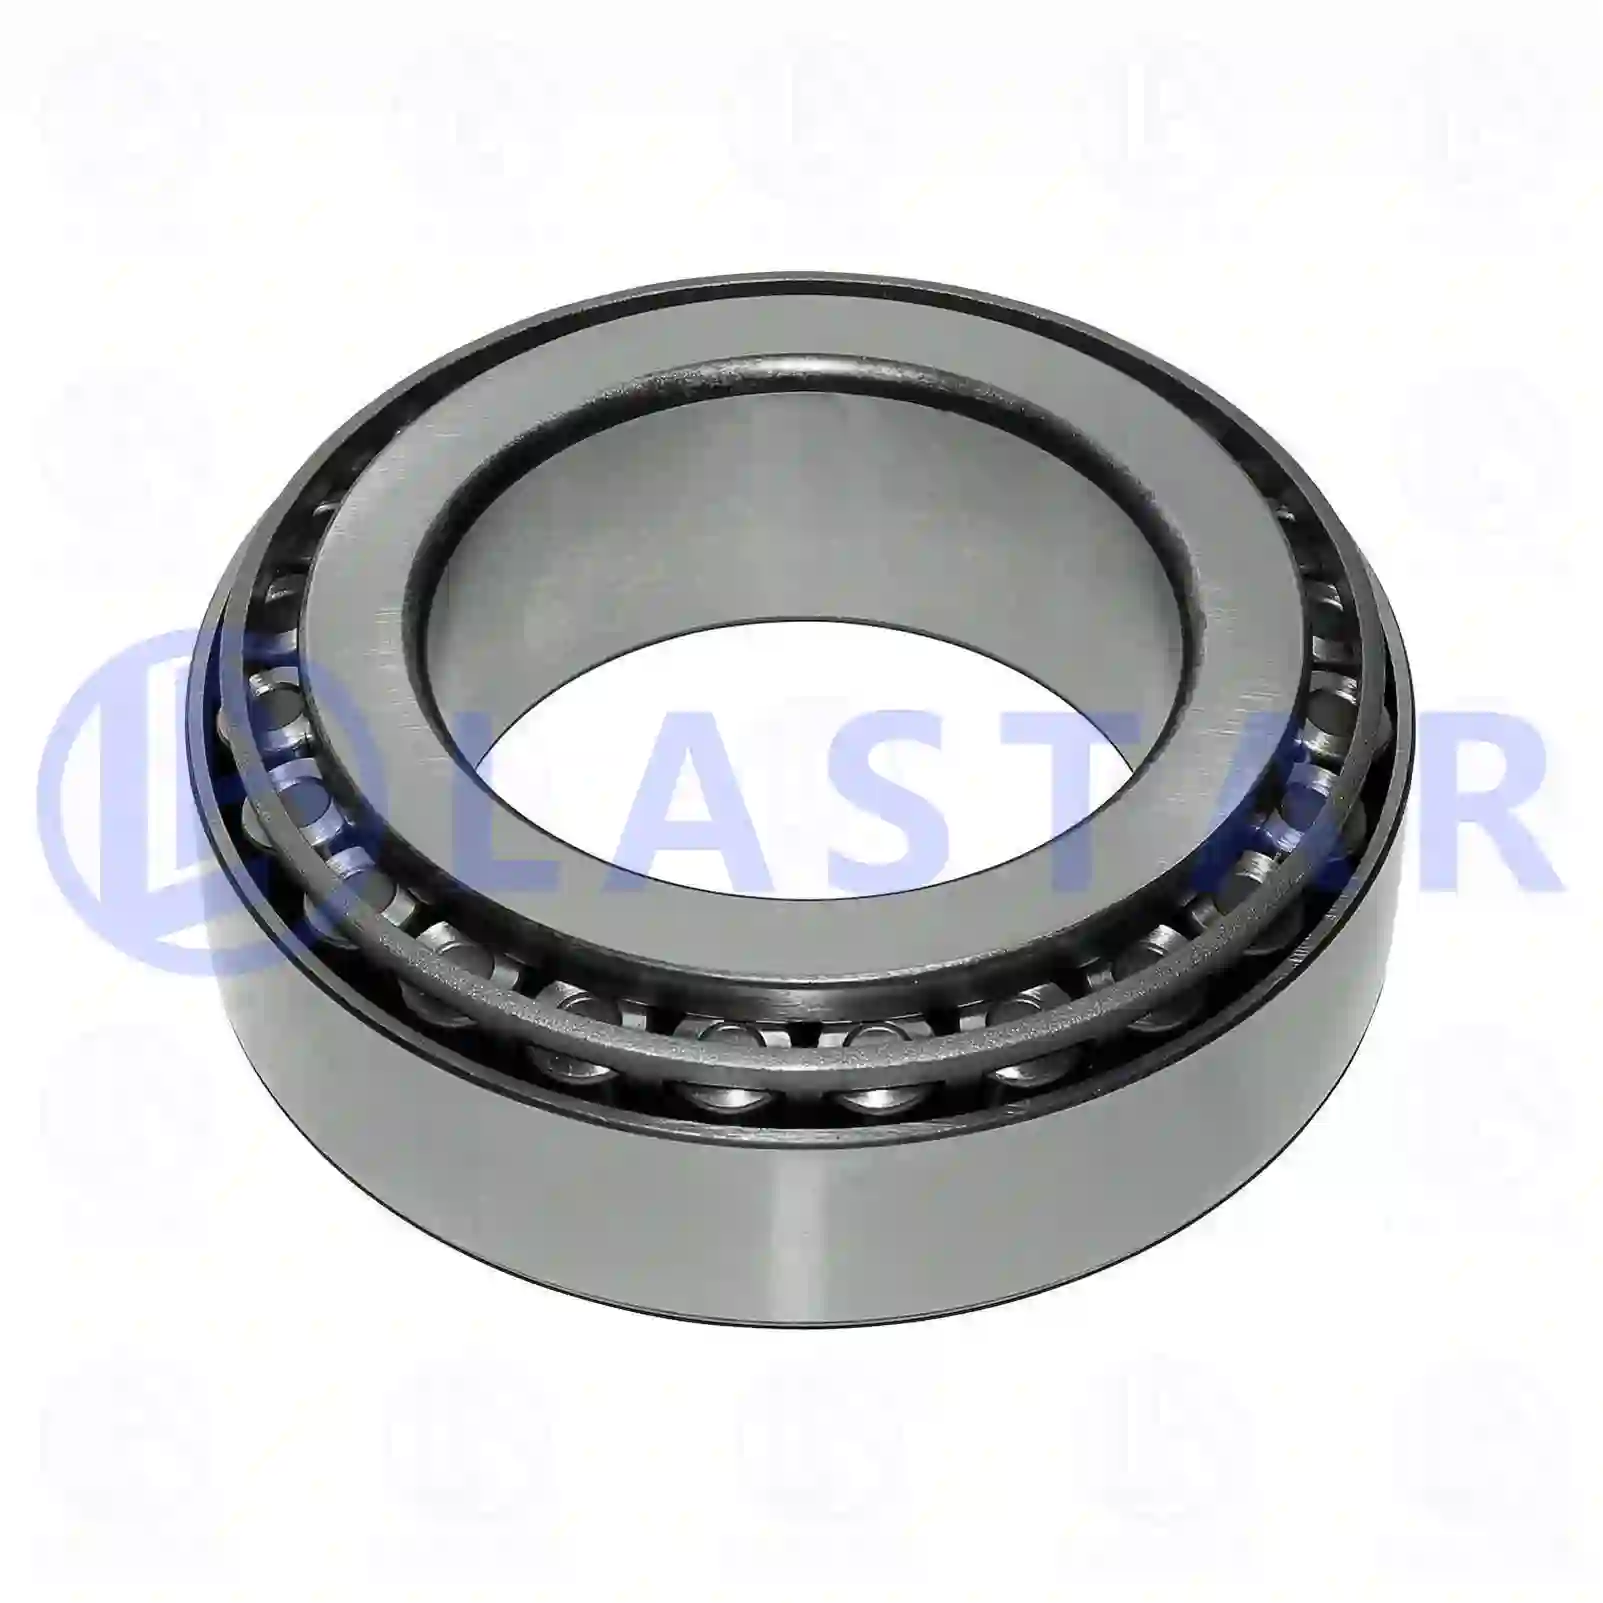 Hub Tapered roller bearing, la no: 77726328 ,  oem no:10500574, 710500574, 00627078, 07164196, 0019806702, 0019806772, 0059818305, 0059818605, 0059819905, 5000675250, 5010439570, 5010587007, 20593388, ZG03029-0008 Lastar Spare Part | Truck Spare Parts, Auotomotive Spare Parts